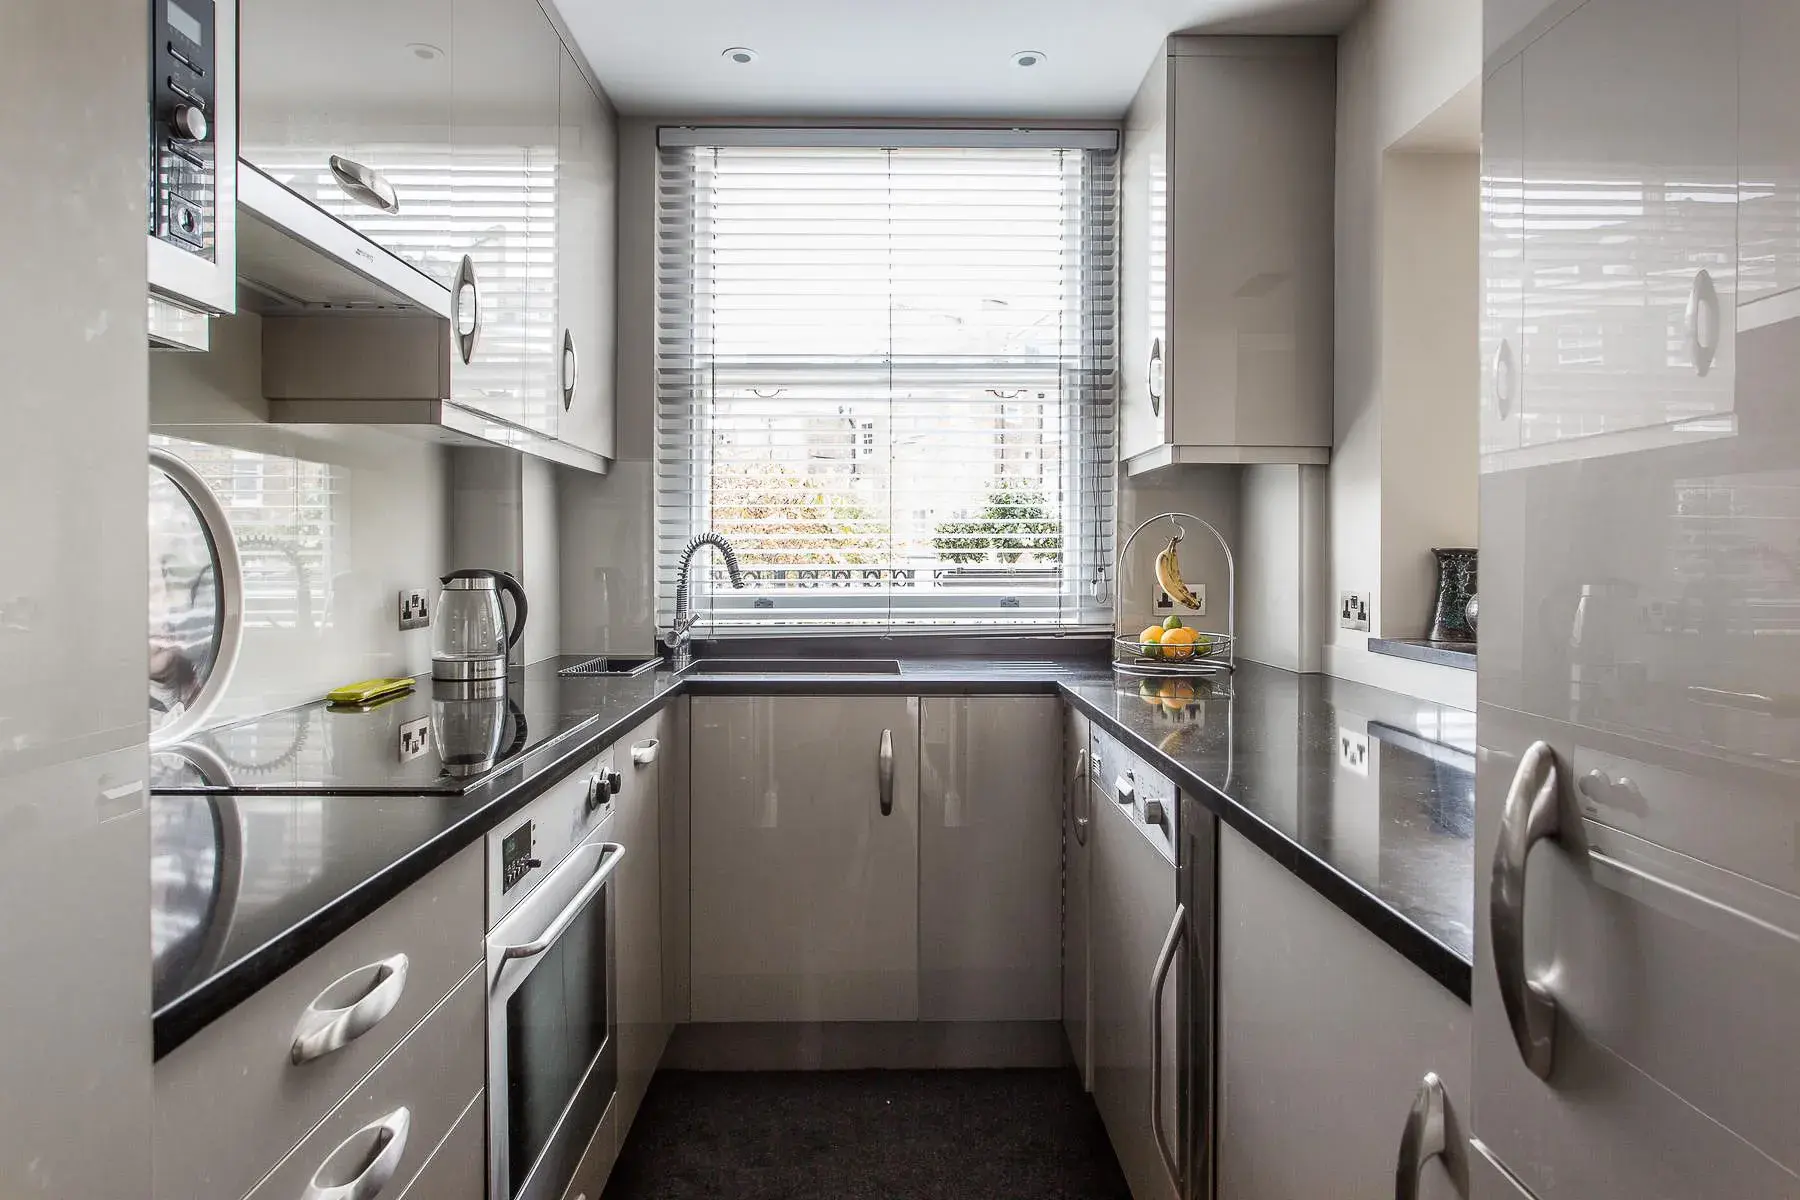 Castellain Road, holiday home in St Johns Wood, London